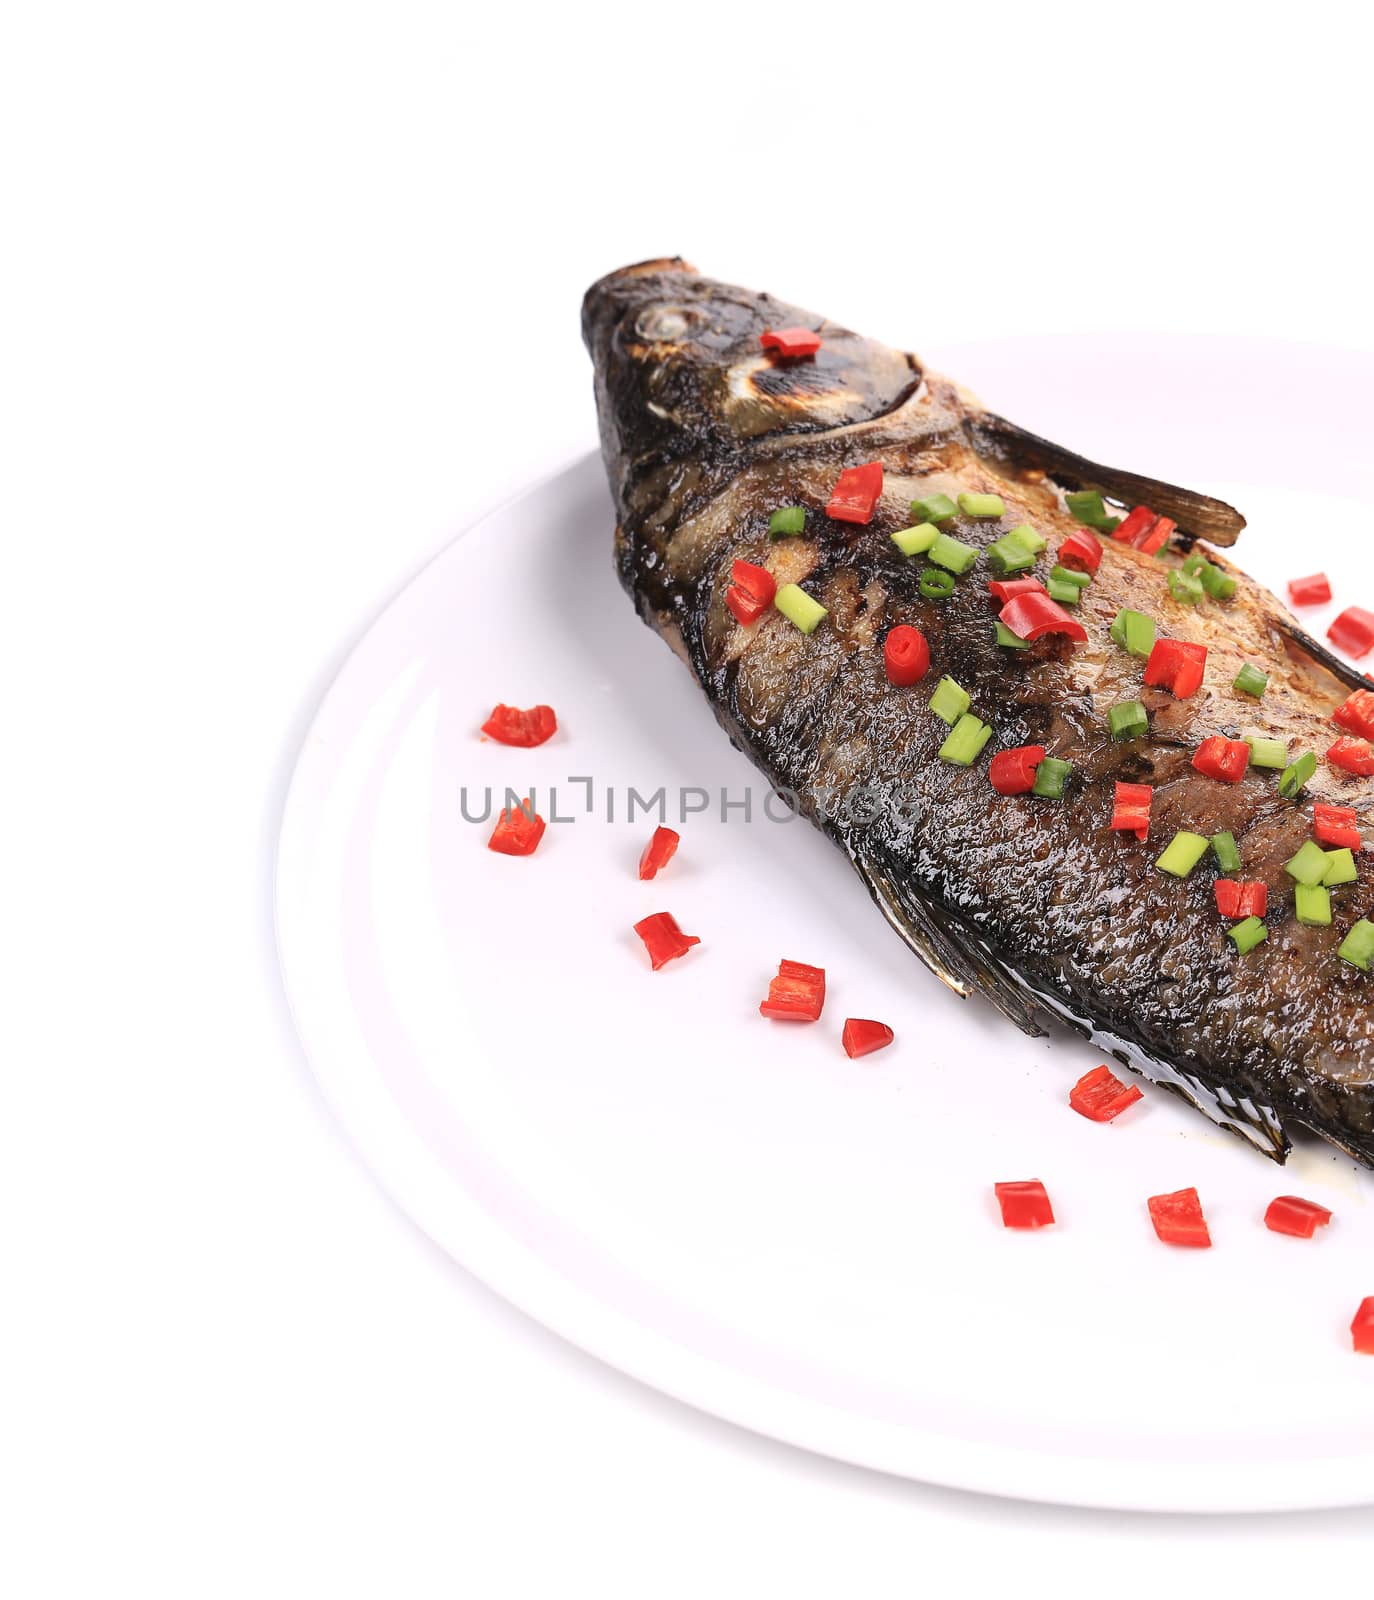 Grilled seabass on a plate. Whole background.